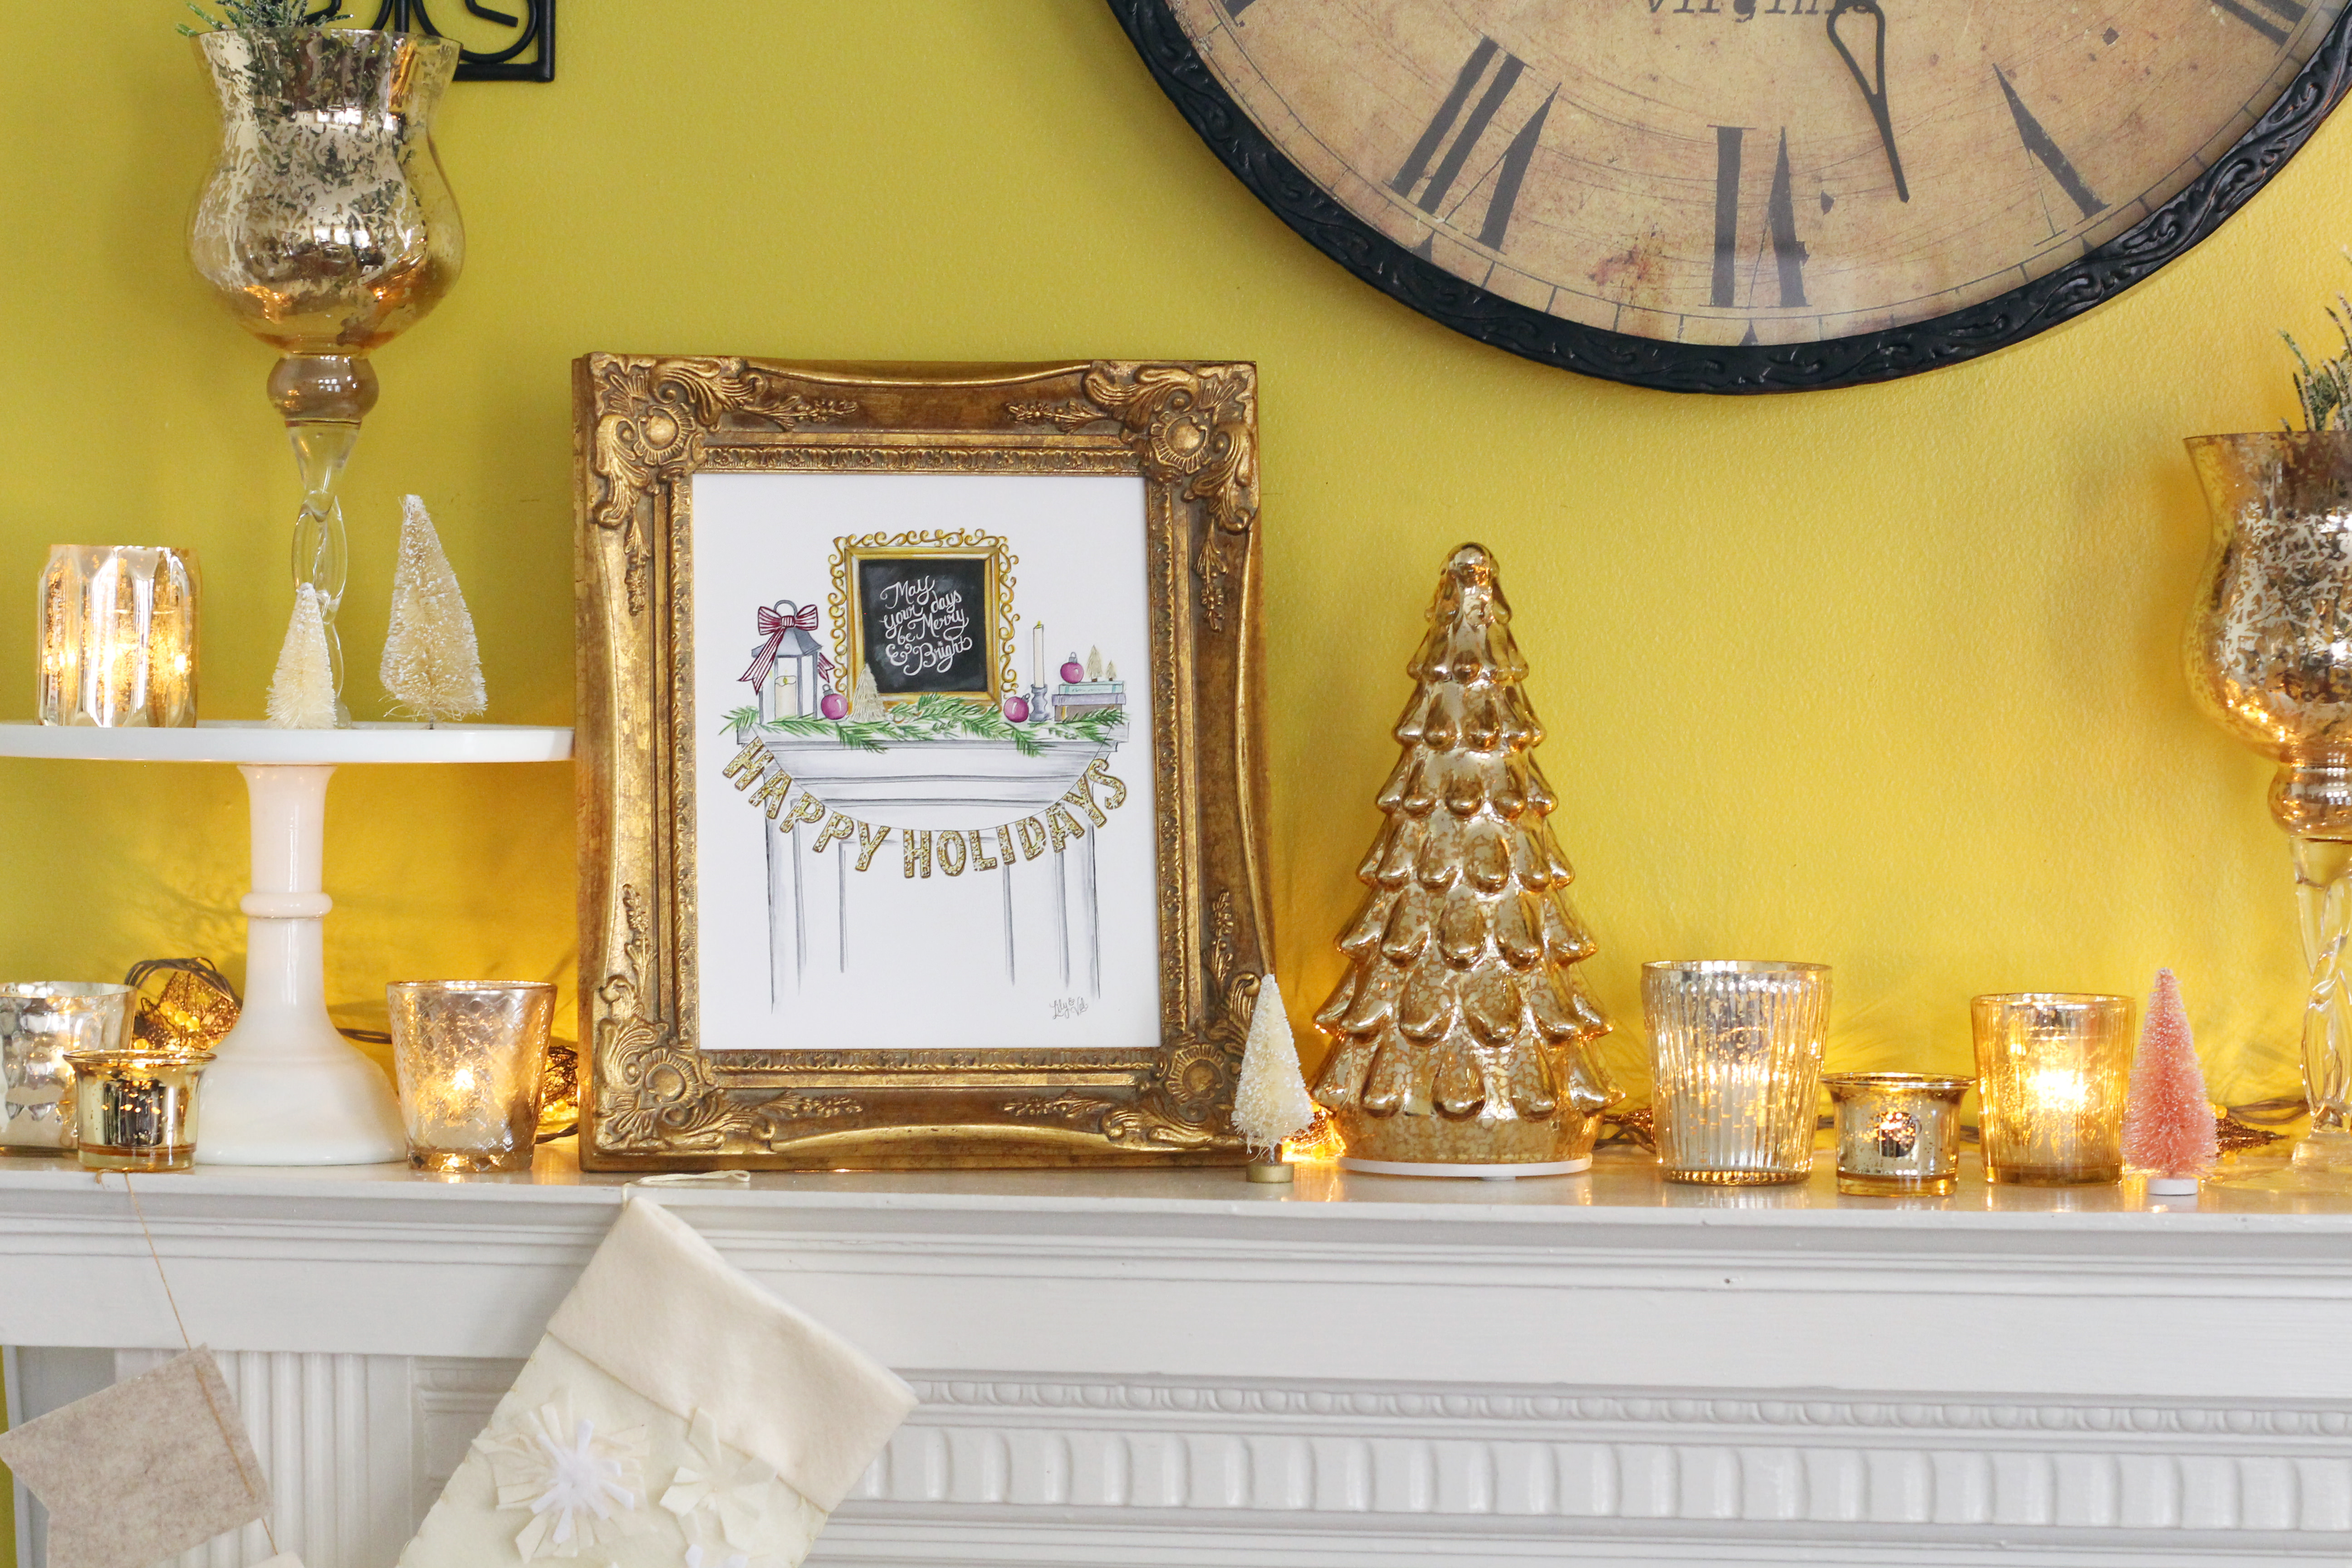 Happy Holidays Print by Lily & Val - perfect accent for mantel decor